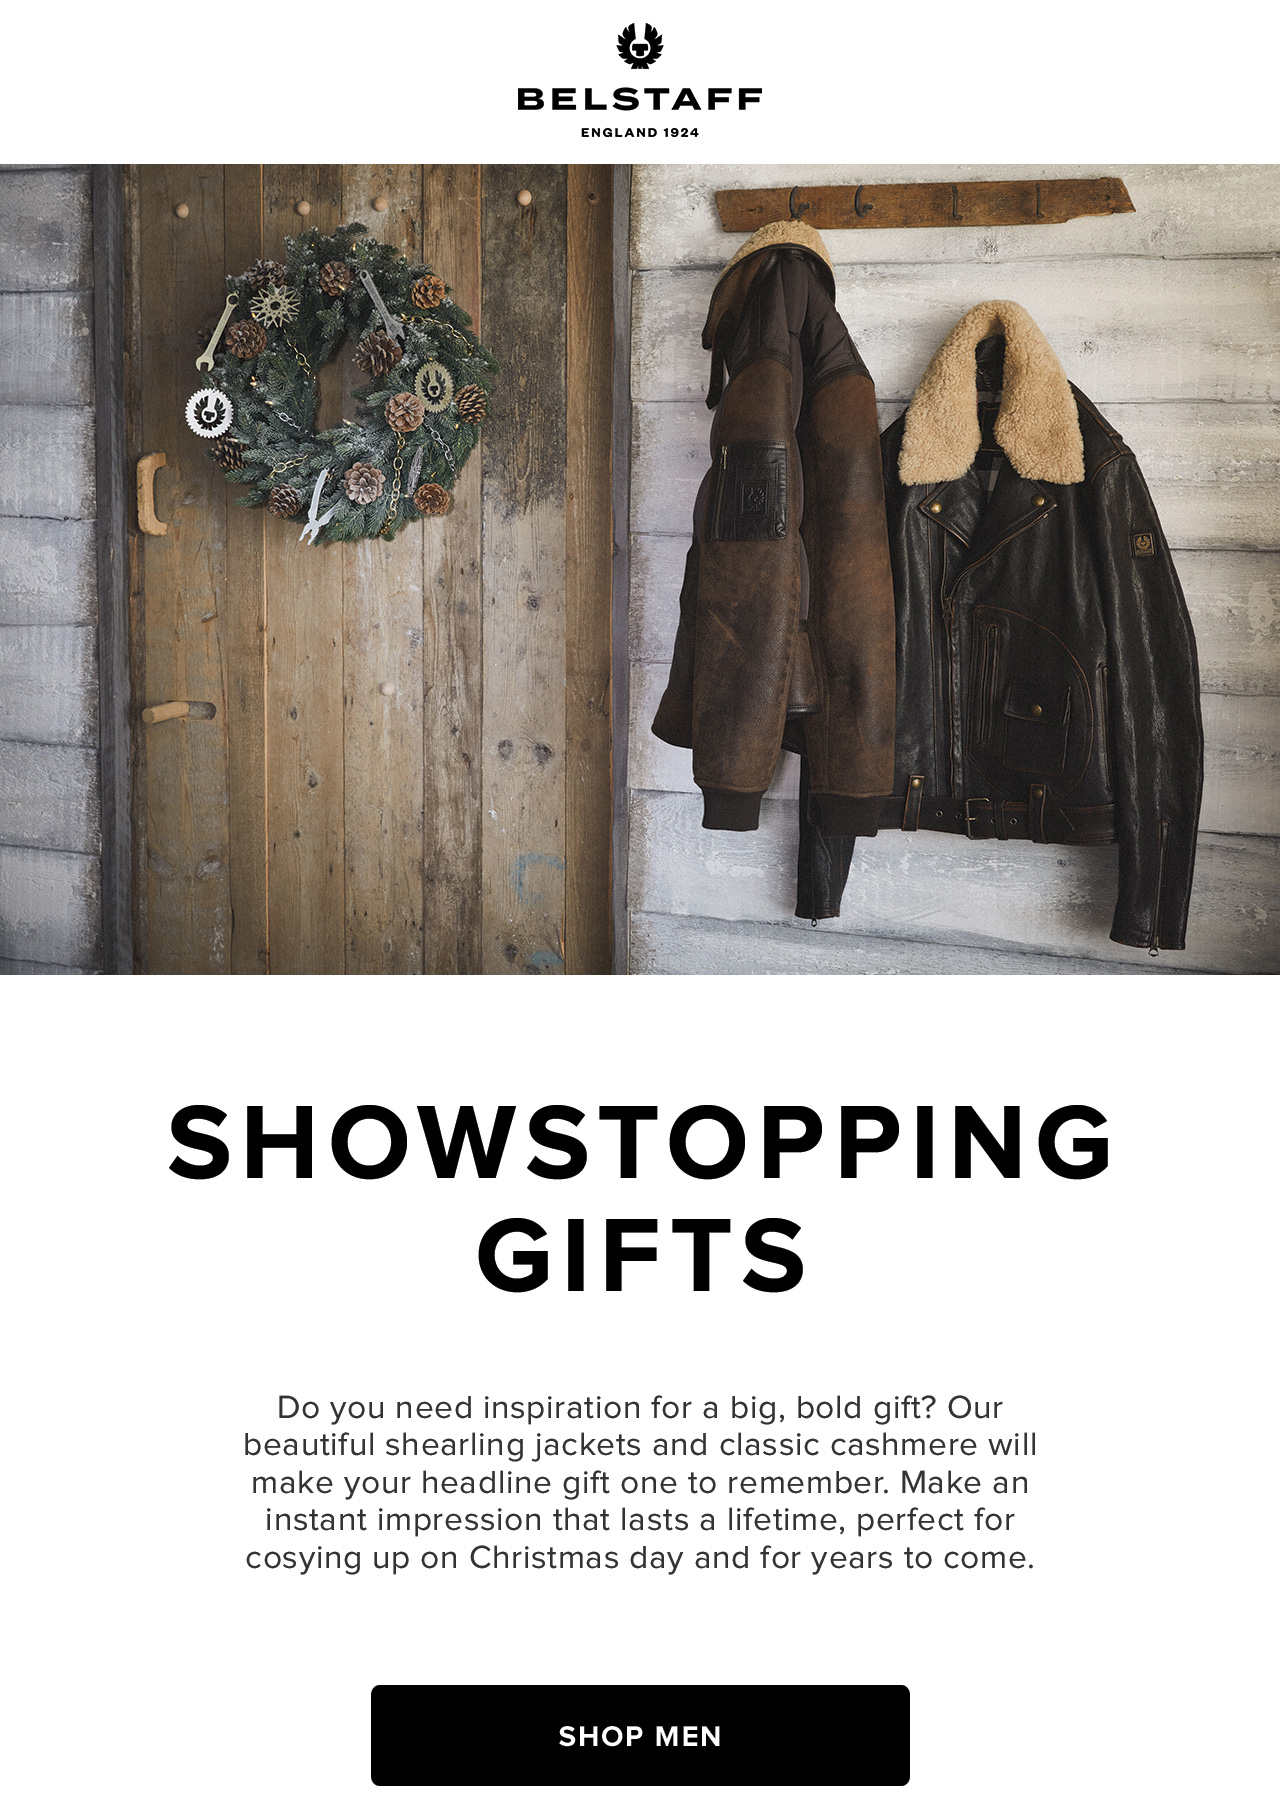 Do you need inspiration for a big, bold gift? Our beautiful shearling jackets and classic cashmere will make your headline gift one to remember. Make an instant impression that lasts a lifetime, perfect for cosying up on Christmas day and for years to come.